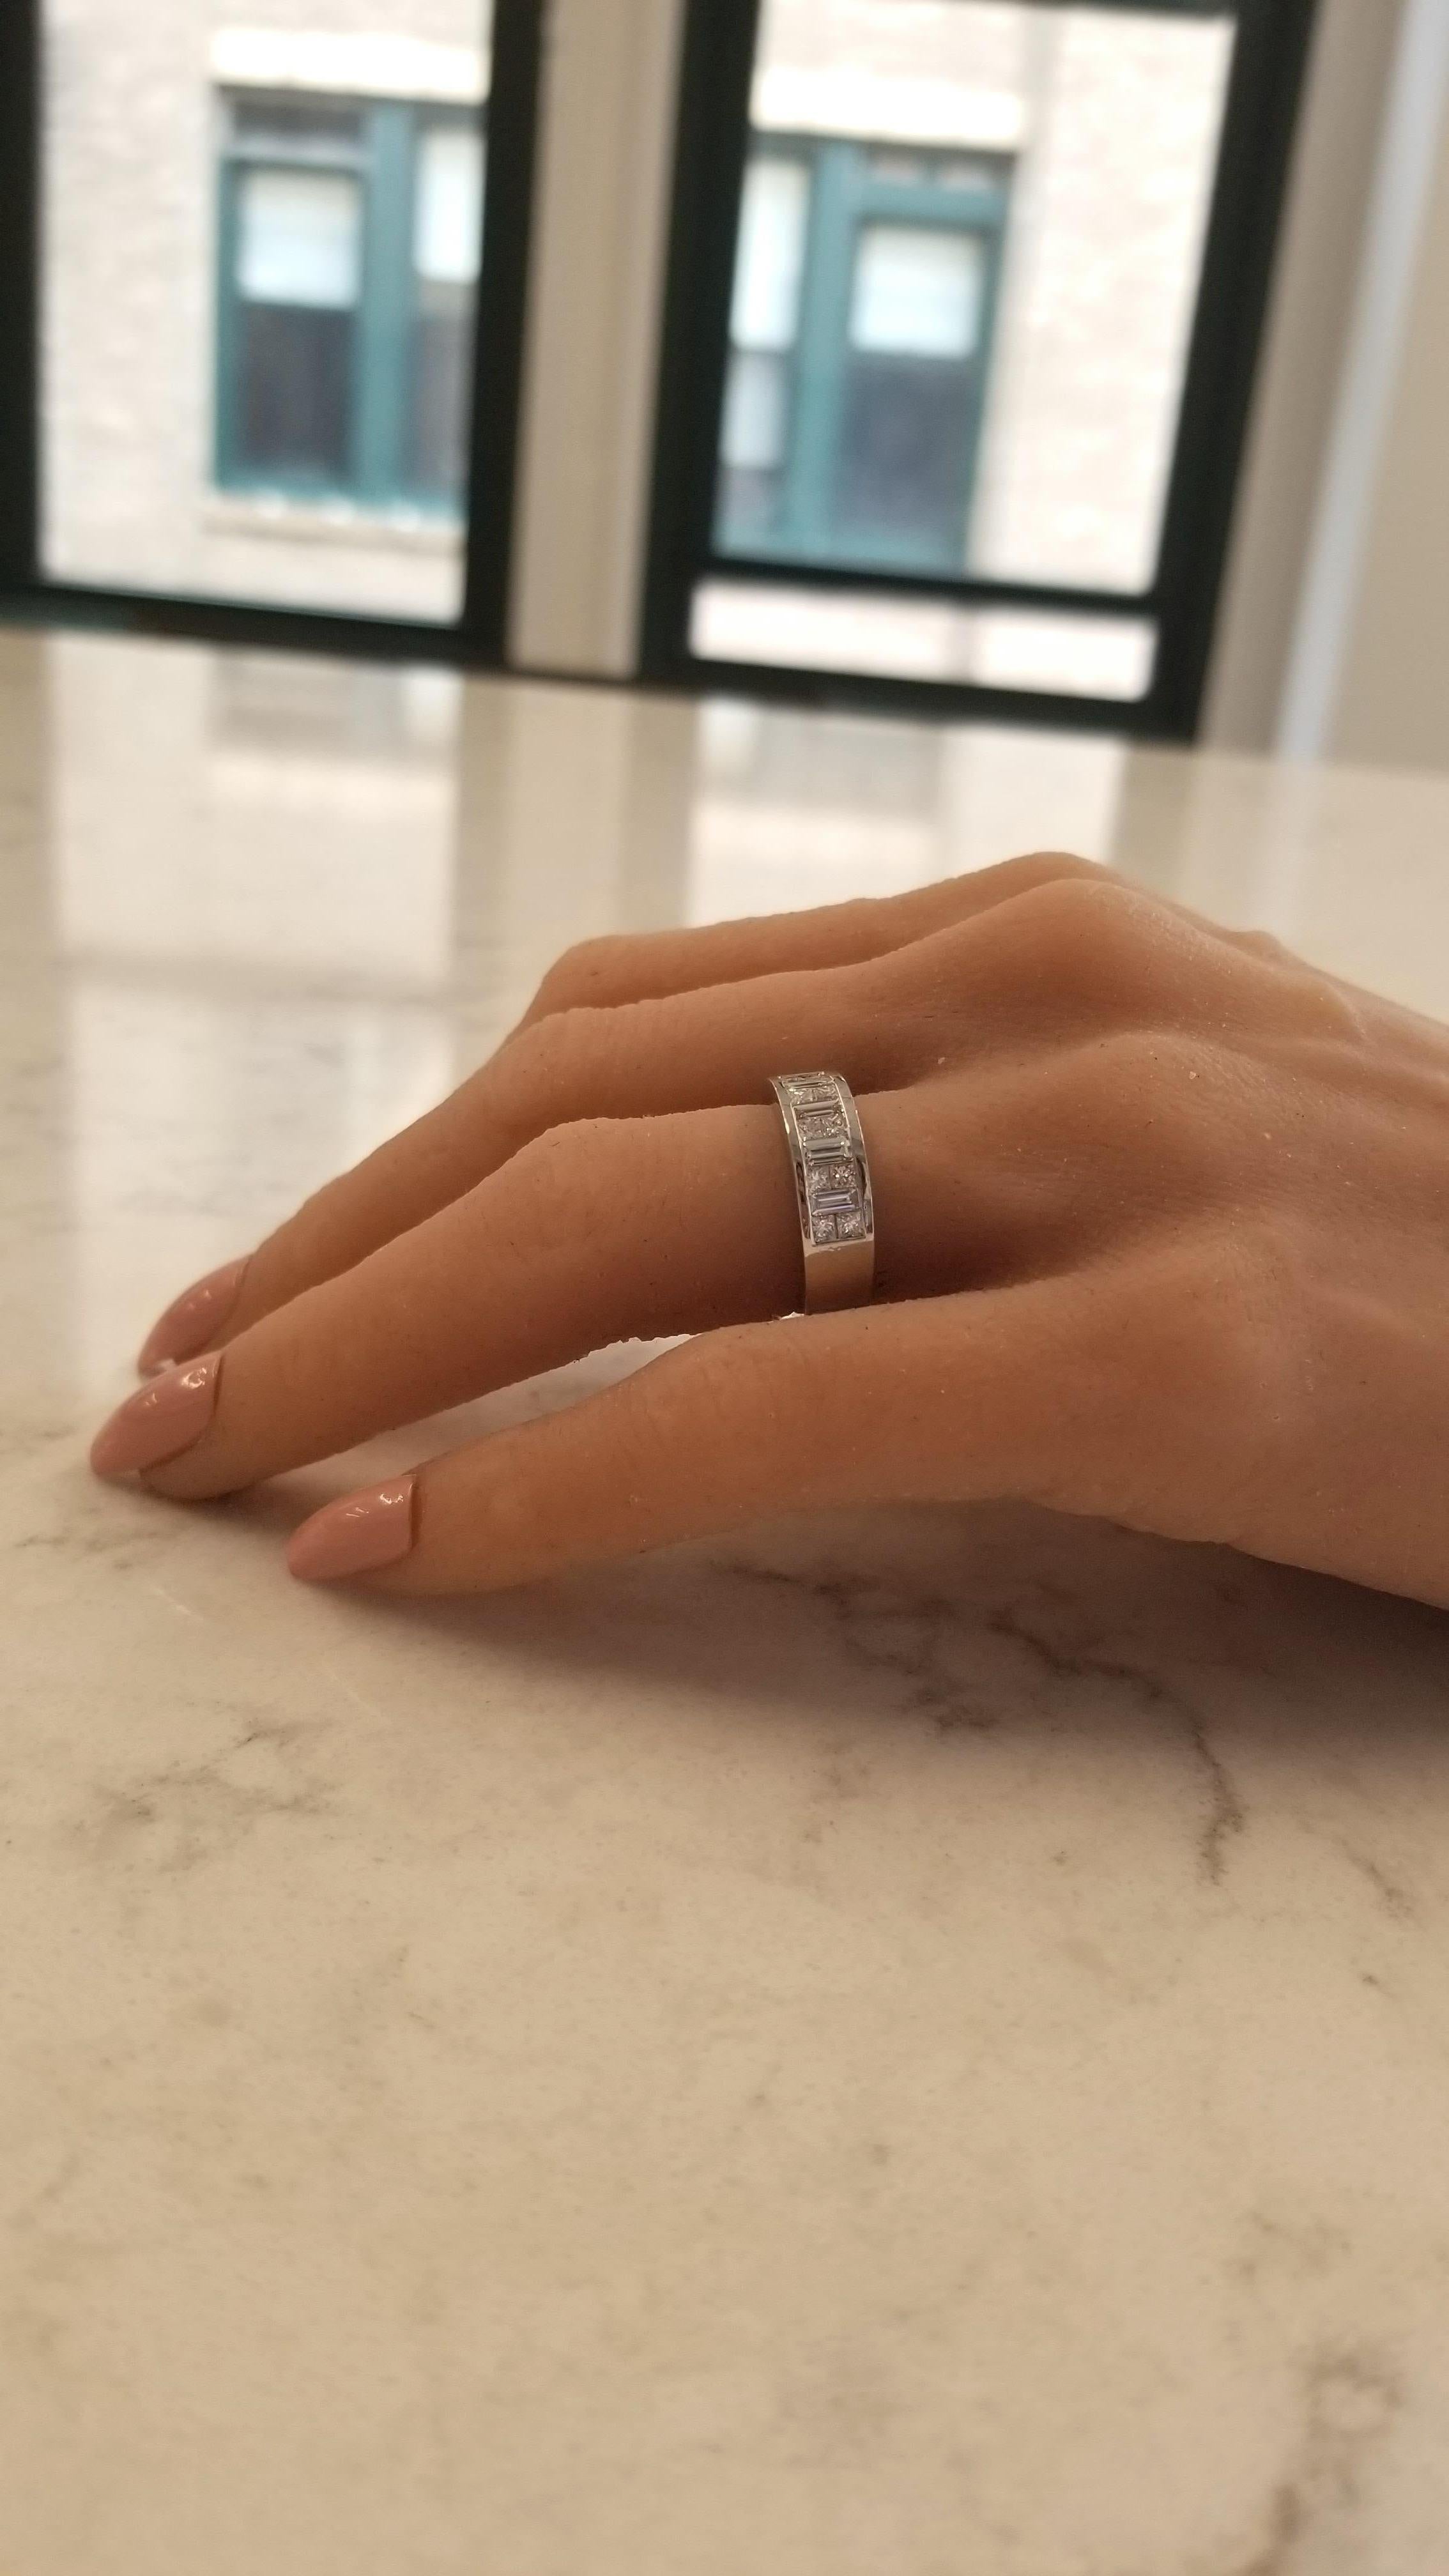 Ideal as a dream wedding or anniversary band, this gorgeous brightly polished platinum diamond band features a total of 0.55 carats of invisibly channel set diamonds, along with 0.52 carats of princess cut diamonds that alternate on the top in a